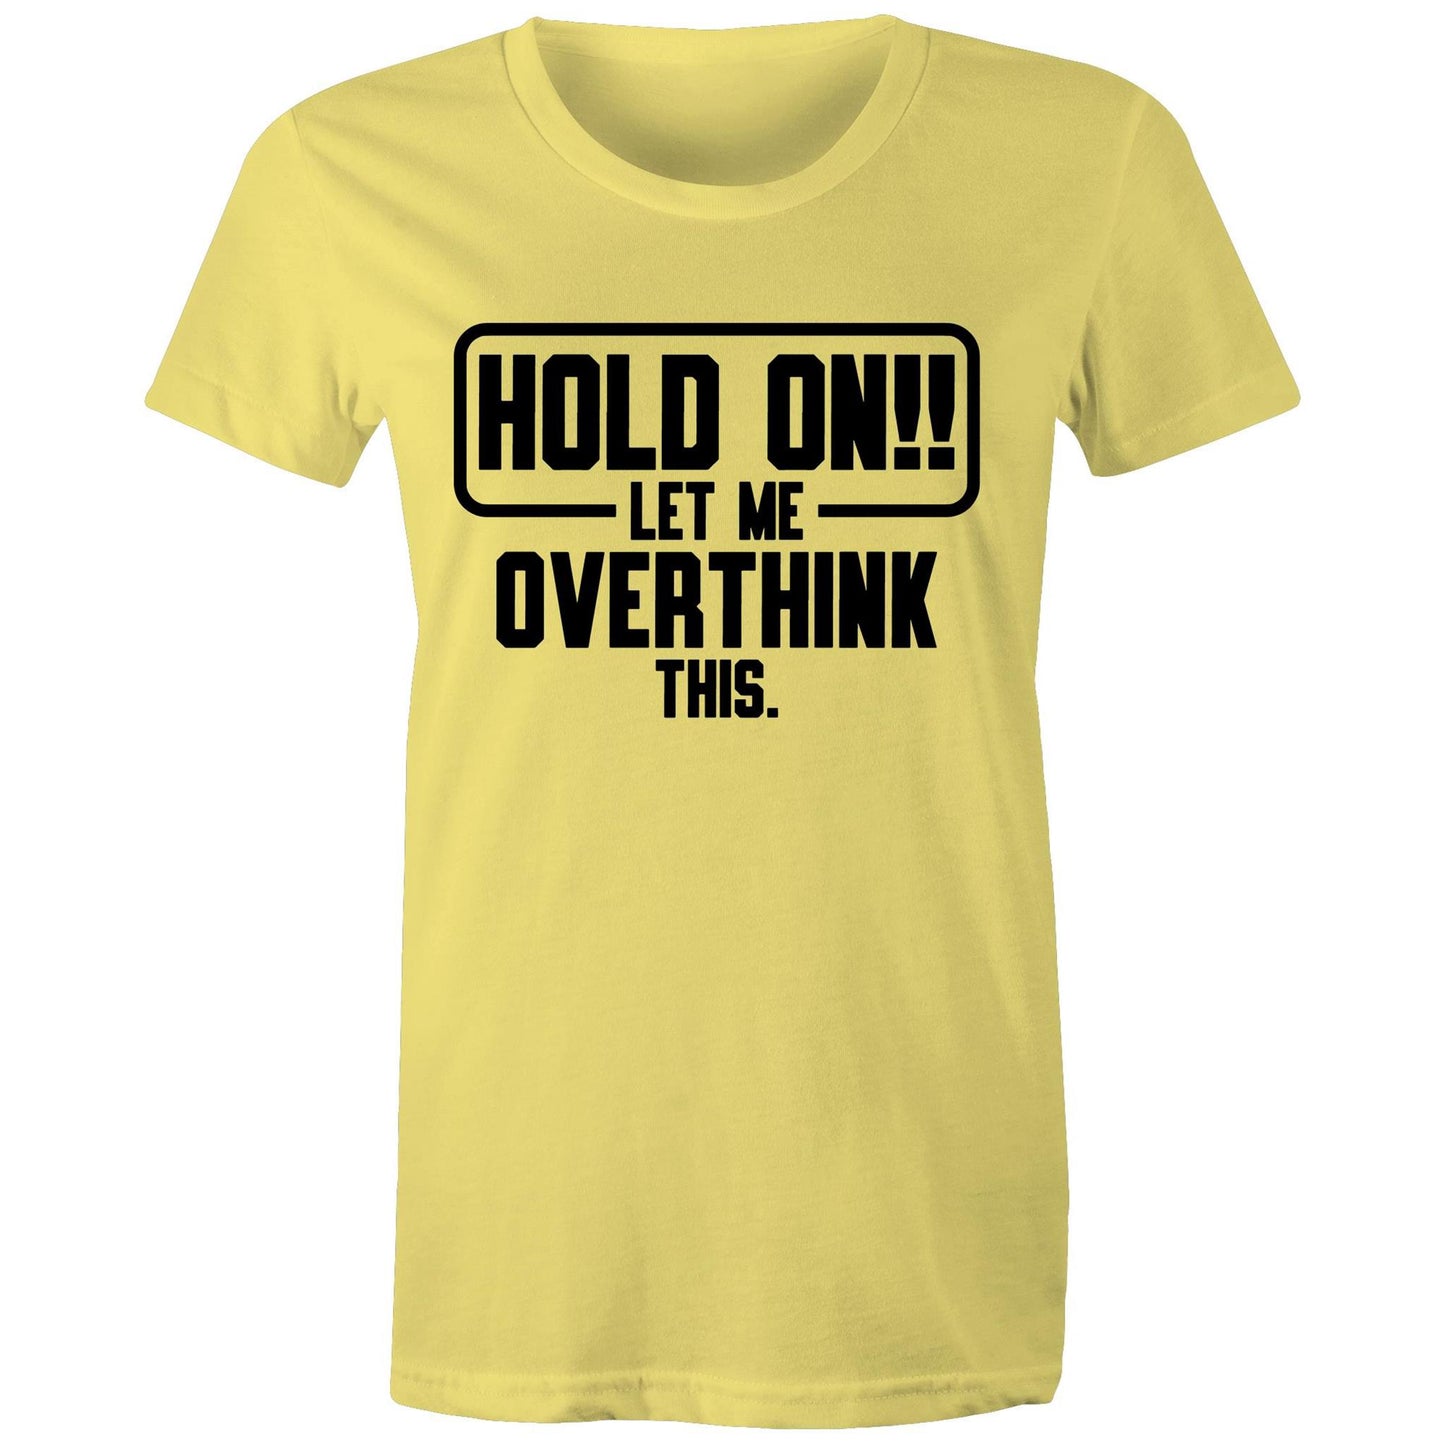 Womens Tee - Hold On Let Me Overthink This